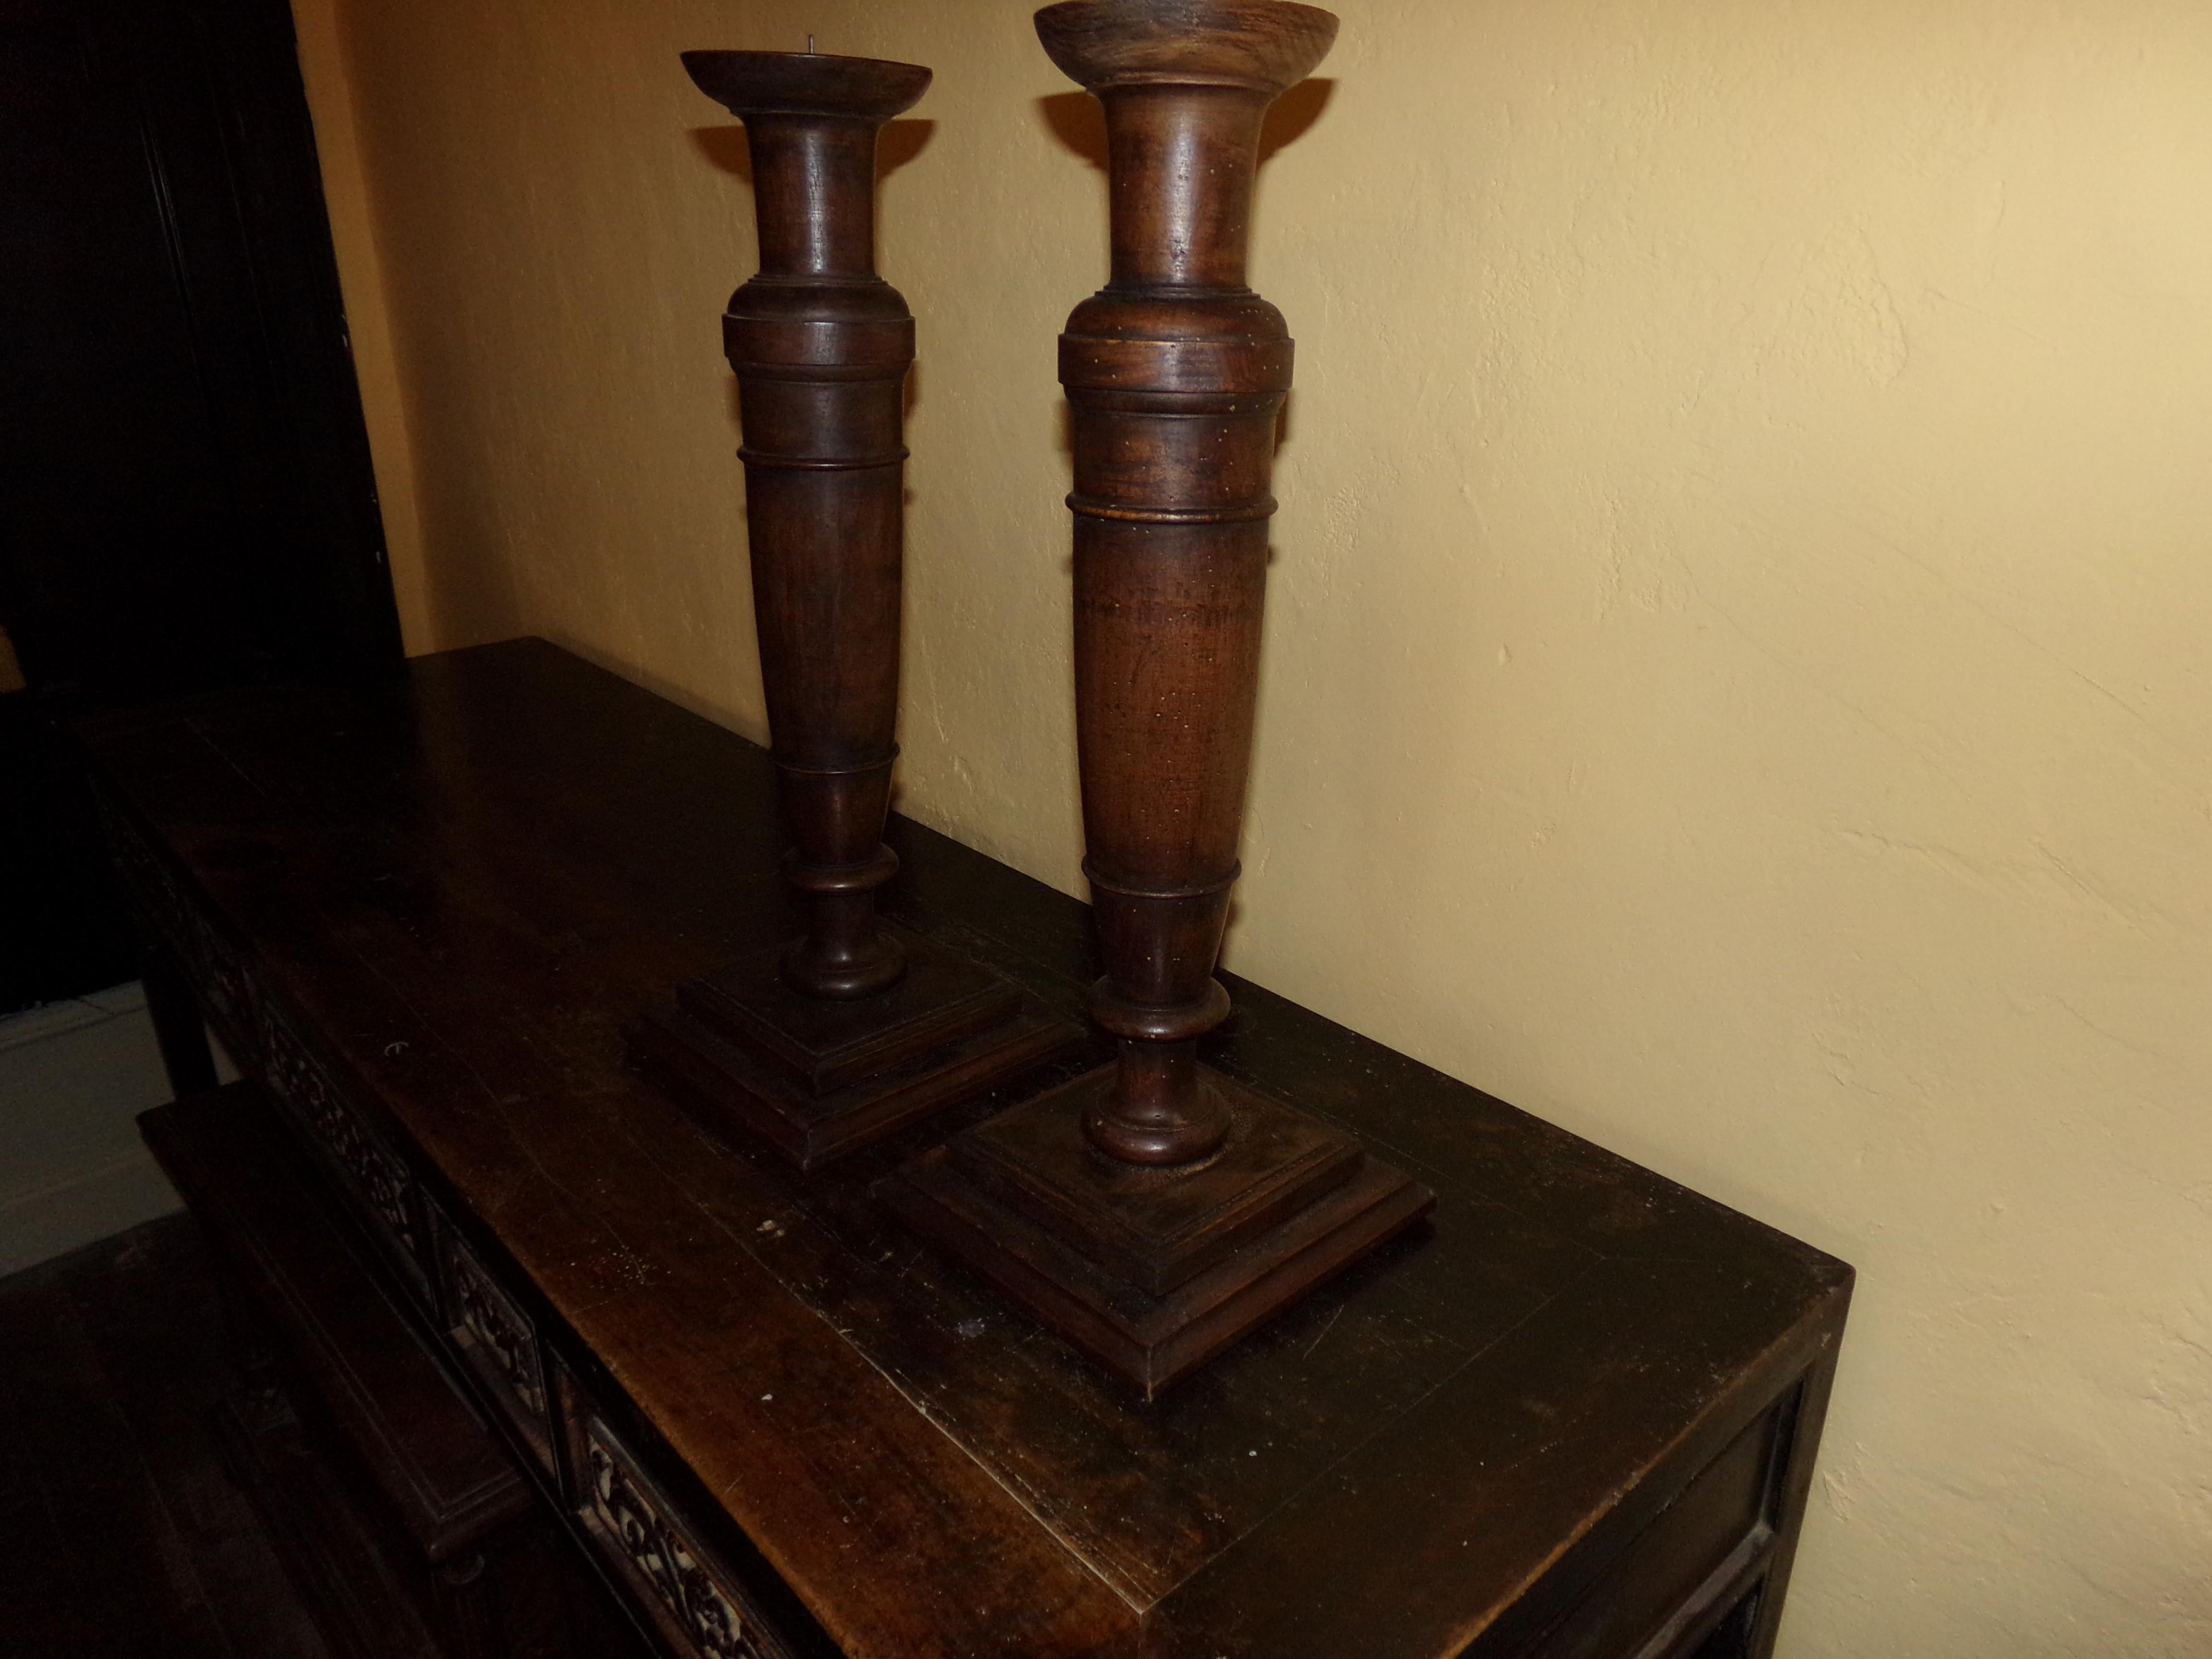 A grand pair of turned and fluted hand carved pricket walnut torchiers or candlesticks beautifully crafted from original circa 1890s wood turnings. Our craftsman has retained all the original patination. A beautiful holiday gift for all the